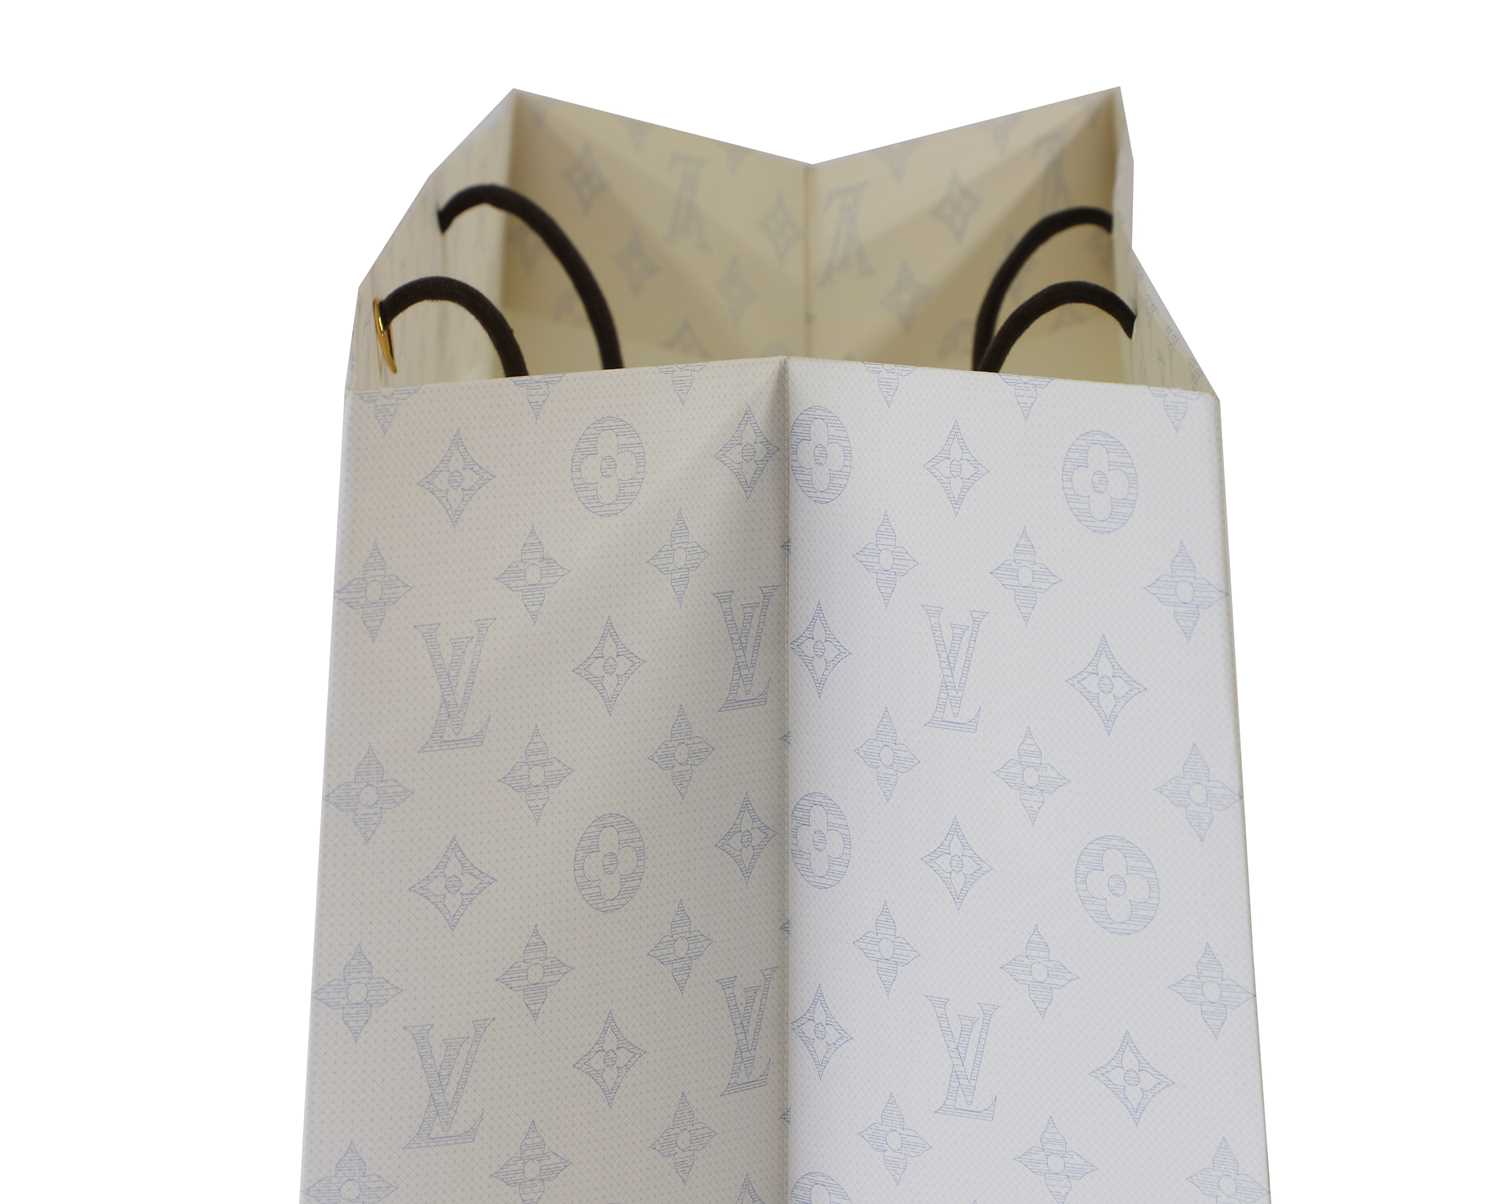 Four Louis Vuitton 160th Anniversary monogrammed paper commemorative shopping bags, - Image 4 of 7